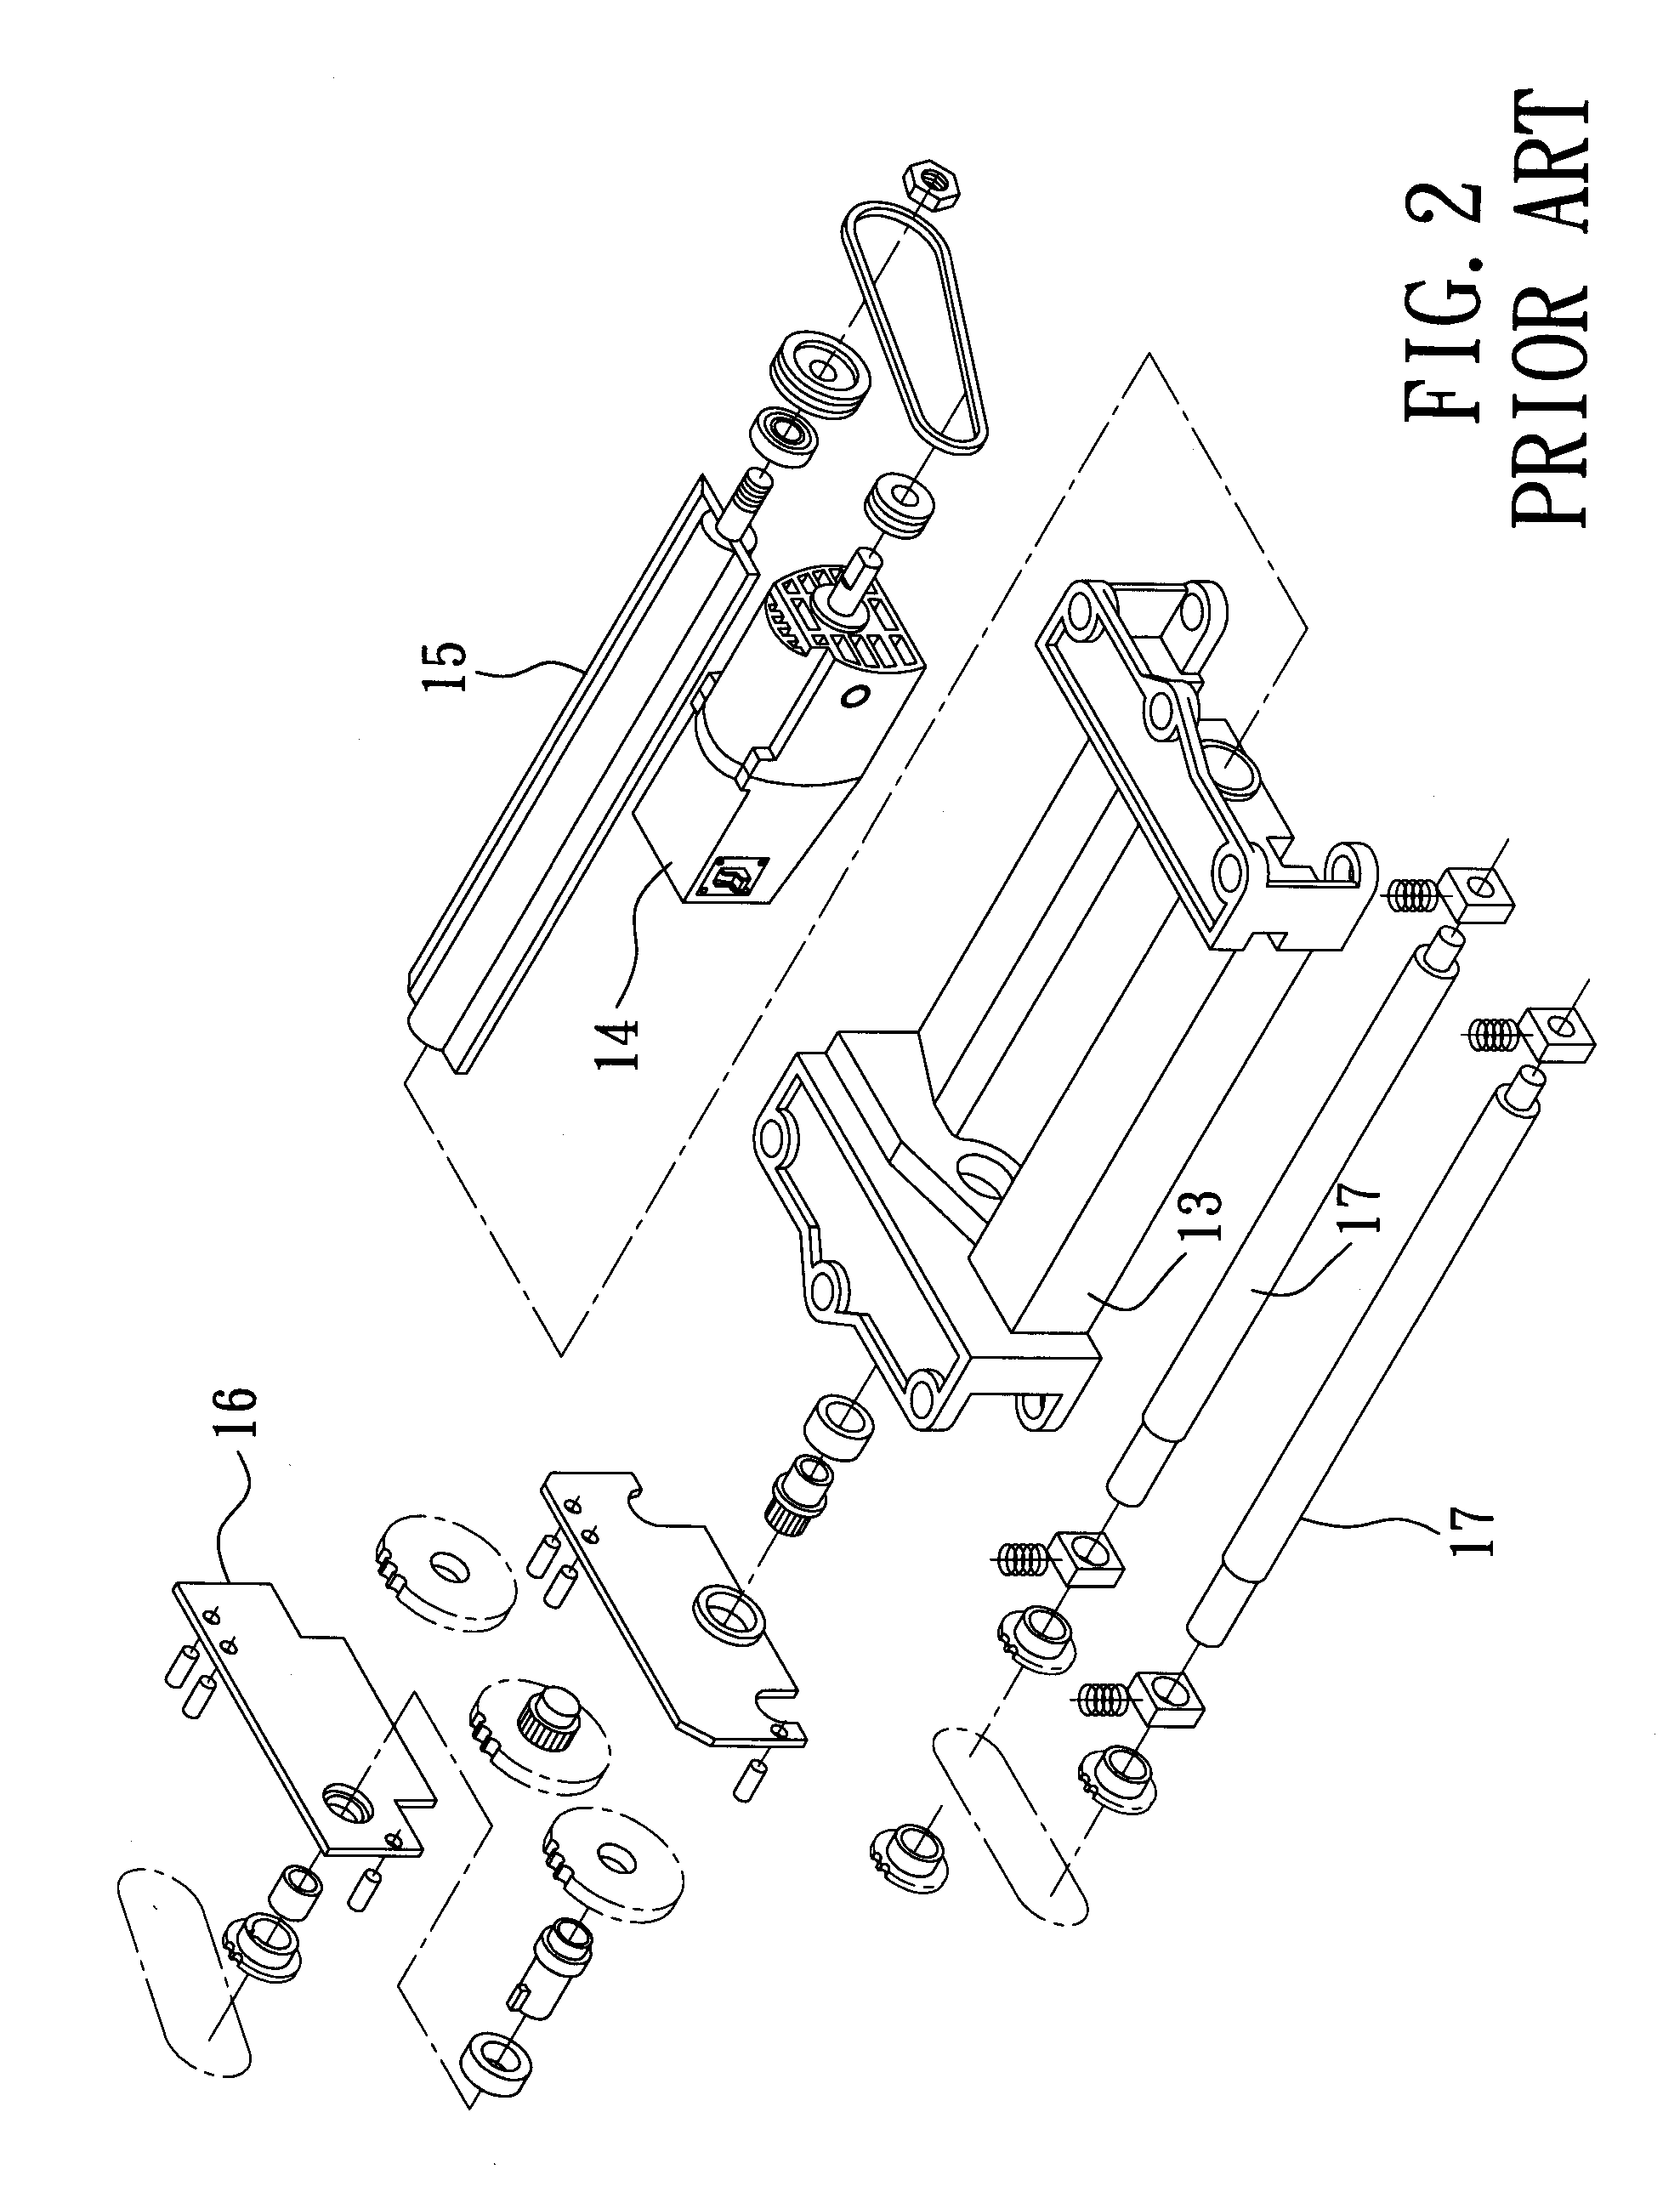 Wood planing machine including a rough-plane cutter and a fine-plane cutter